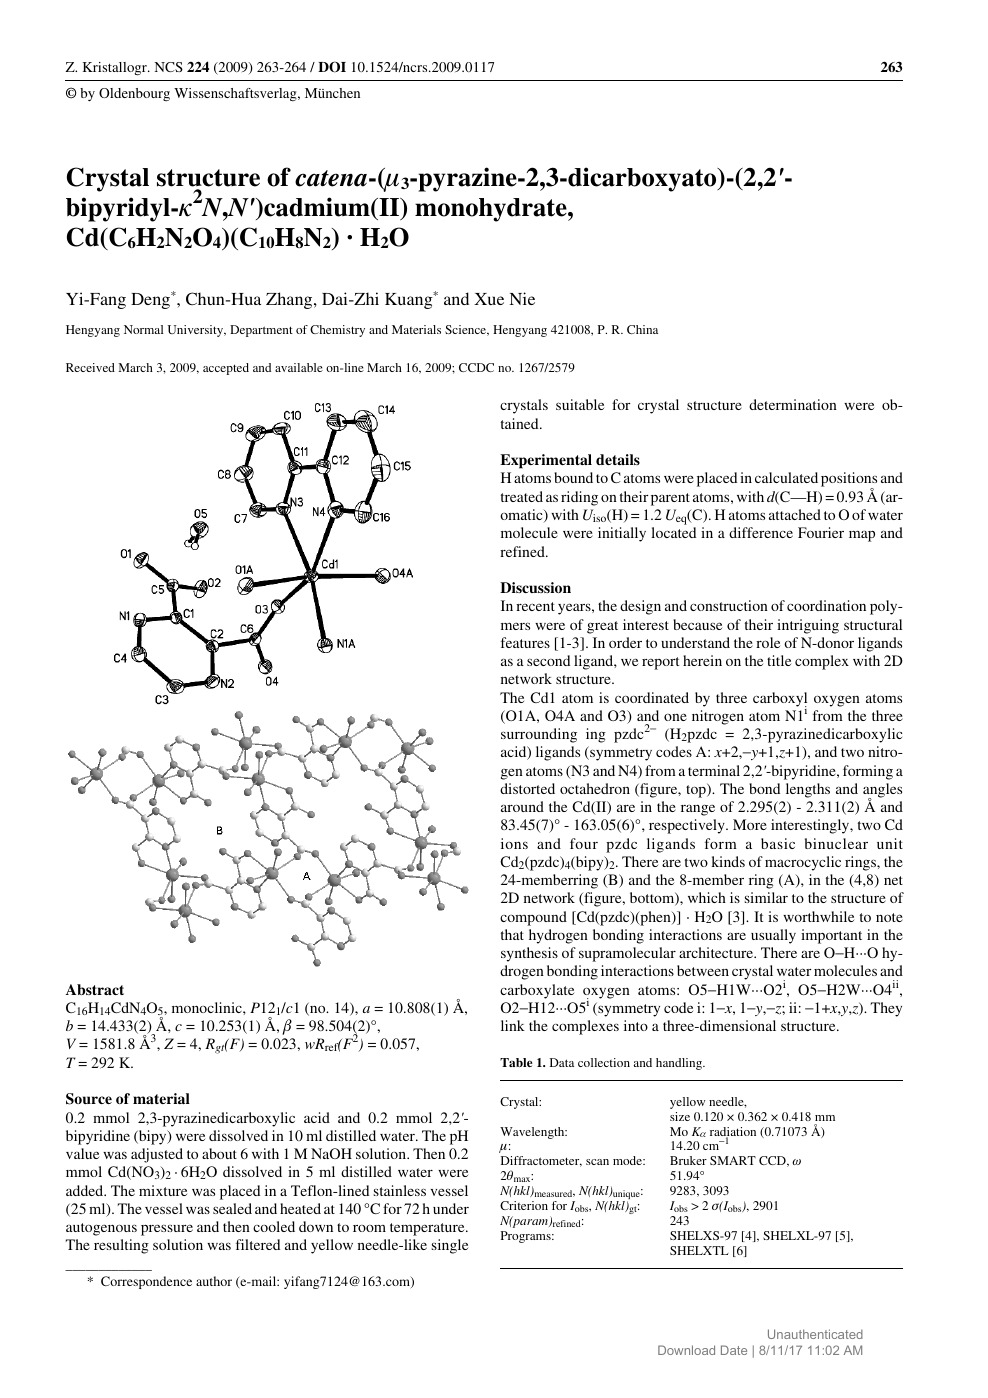 Crystal Structure Of Catena M3 Pyrazine 2 3 Dicarboxyato 2 2 Bipyridyl 2n N Cadmium Ii Monohydrate Cd C6h2n2o4 C10h8n2 H2o Topic Of Research Paper In Biological Sciences Download Scholarly Article Pdf And Read For Free On Cyberleninka